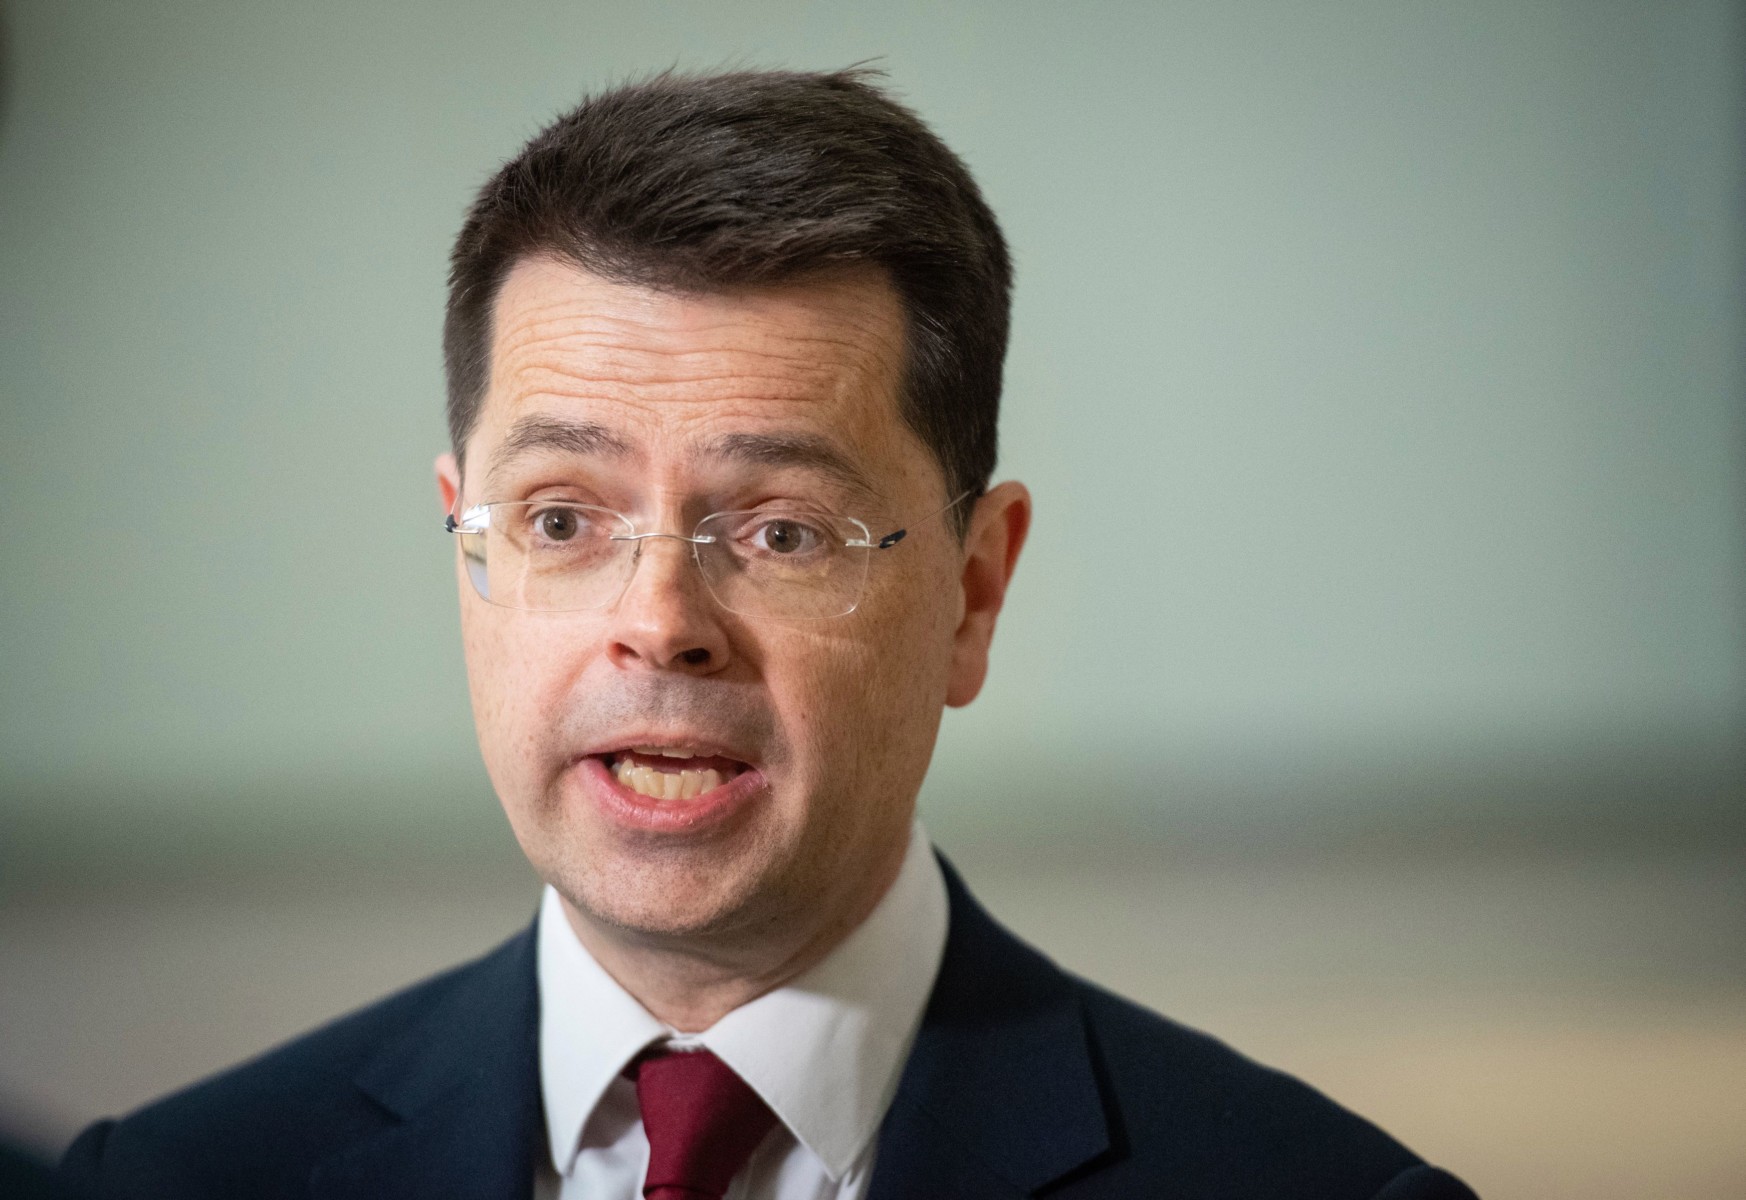 Security Minister James Brokenshire is staying home after attending a spy summit with an Australian MP who has since been tested positive